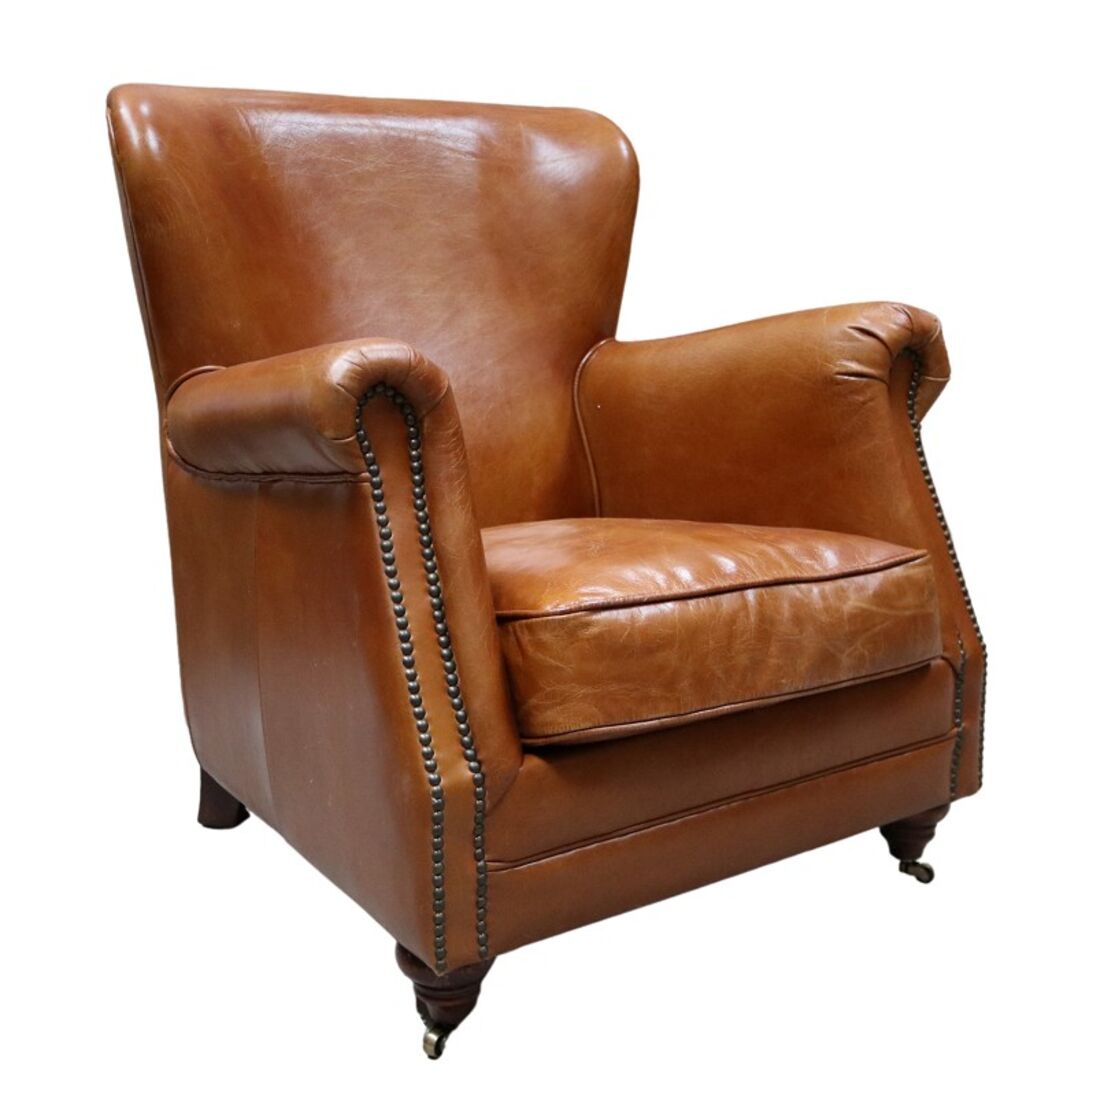 Vintage High Back Distressed Tan, Contemporary Leather Armchairs Uk